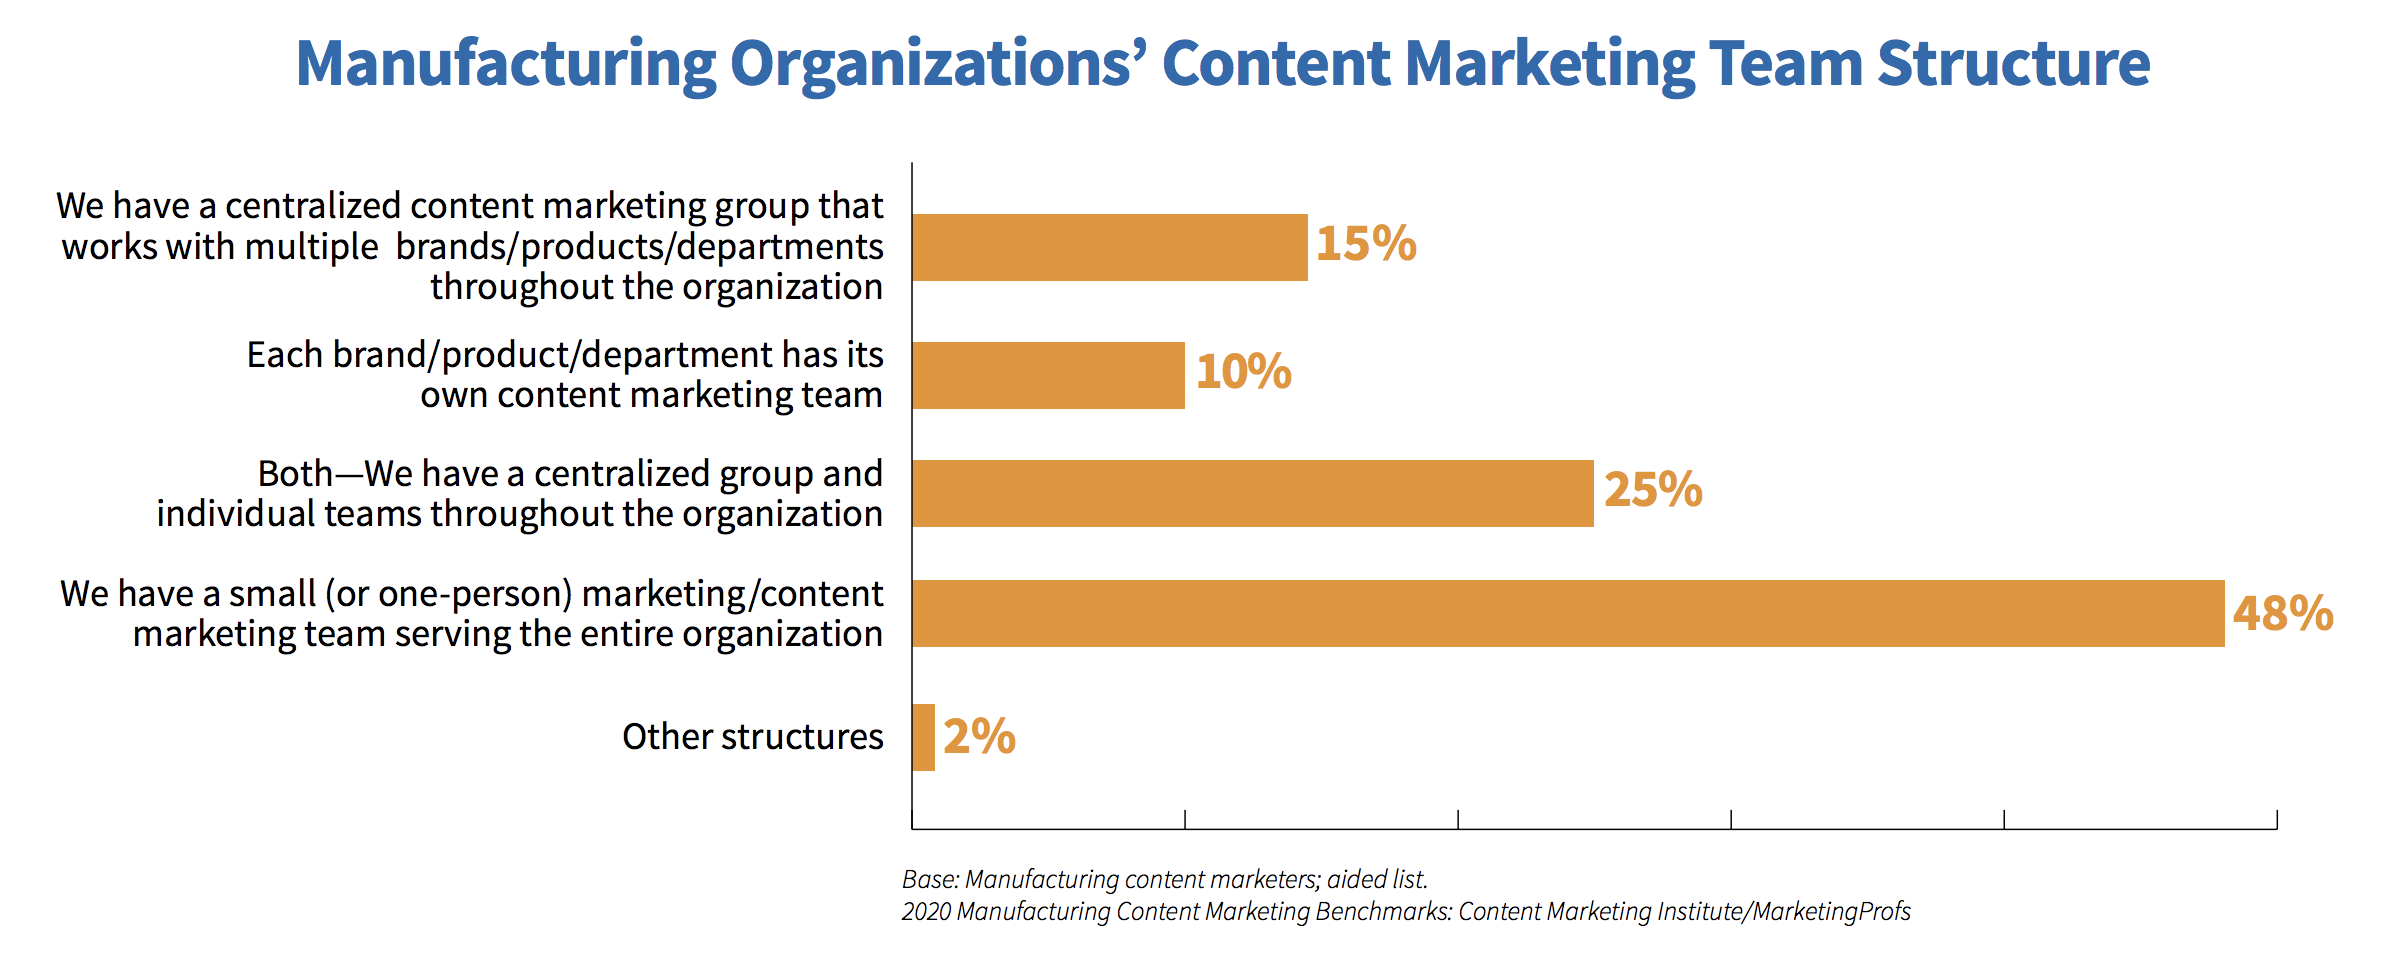 How Manufacturing Content Teams are Structured